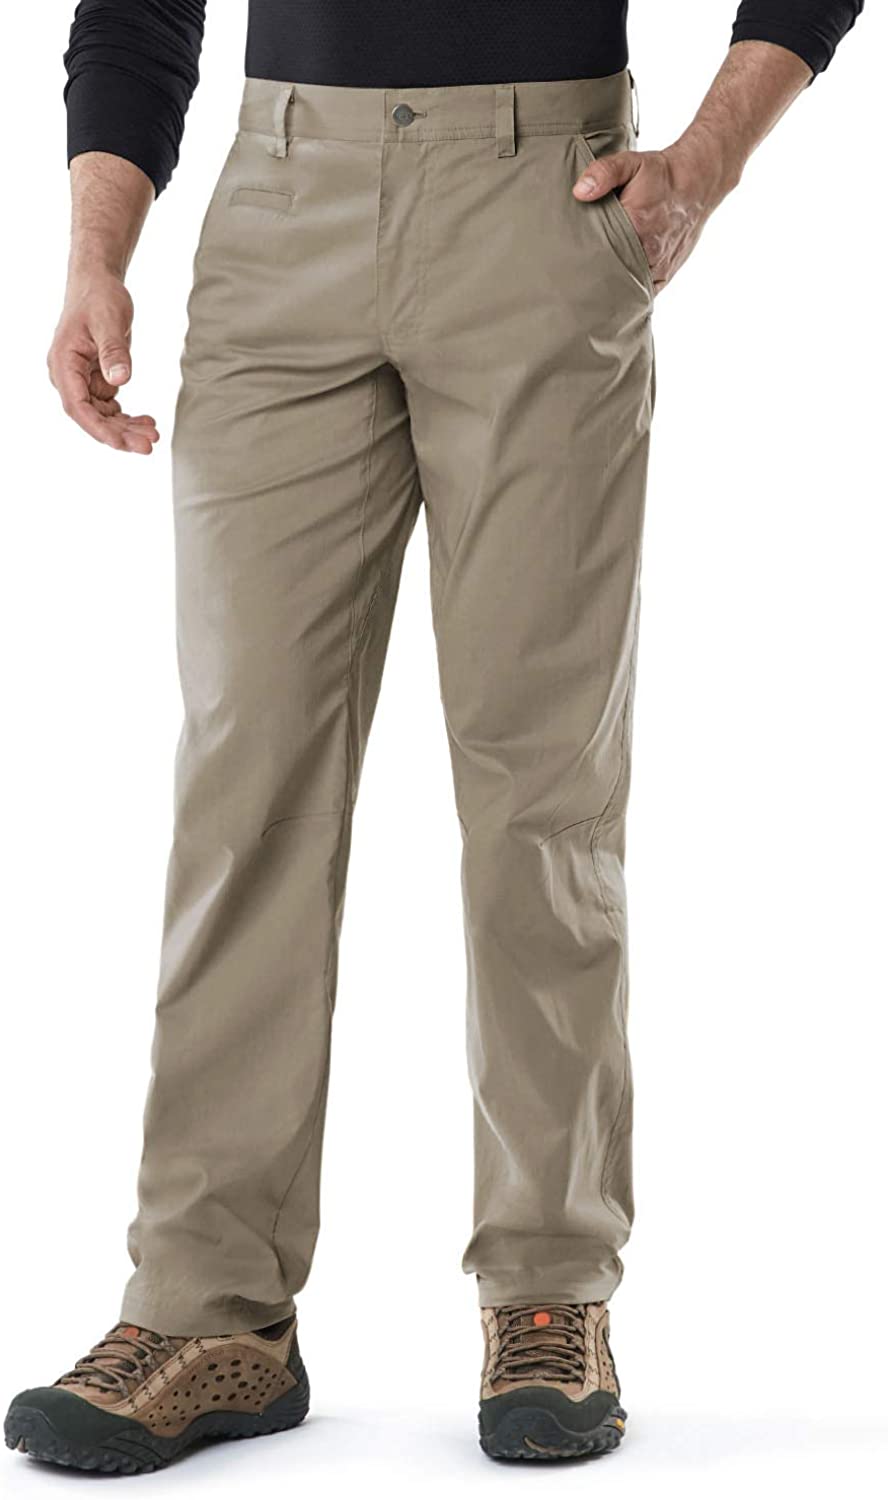 Water Resistant Outdoor Pants Lightweight Stretch Cargo/Straight Work Pants CQR Men's Hiking Pants UPF 50+ Outdoor Apparel 